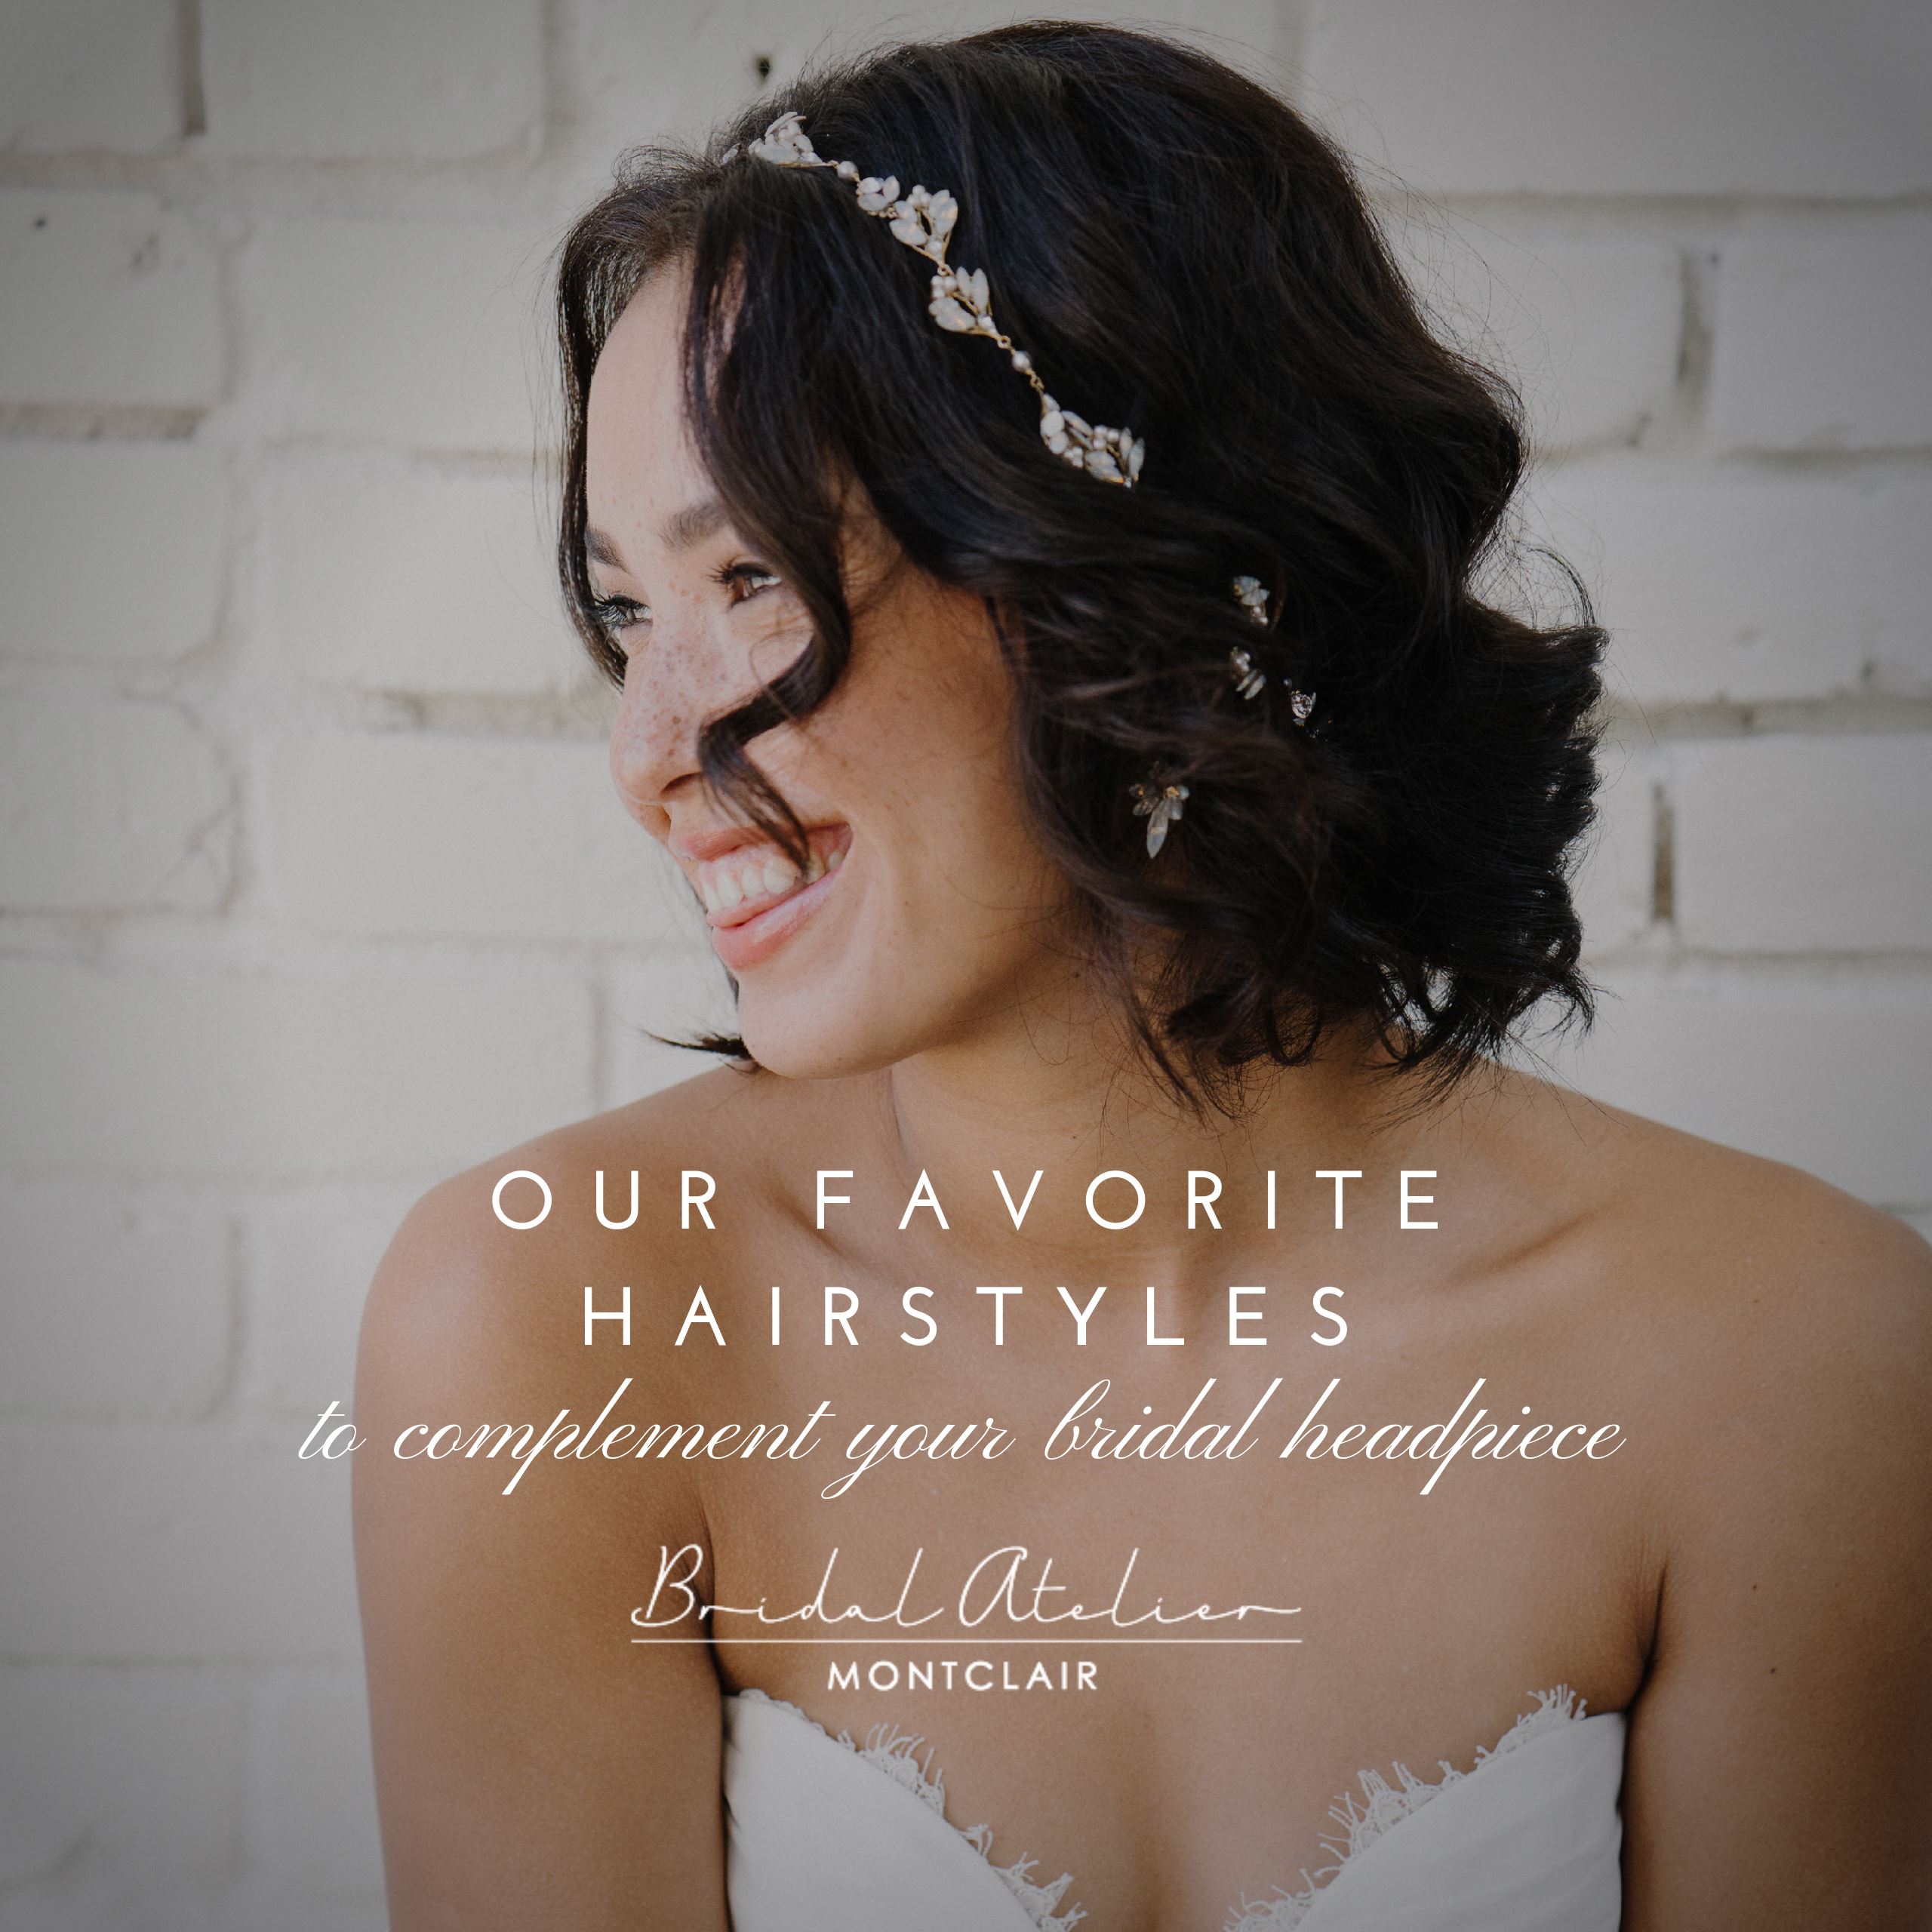 Our Favorite Hairstyles to Complement Your Bridal Headpiece. Desktop Image